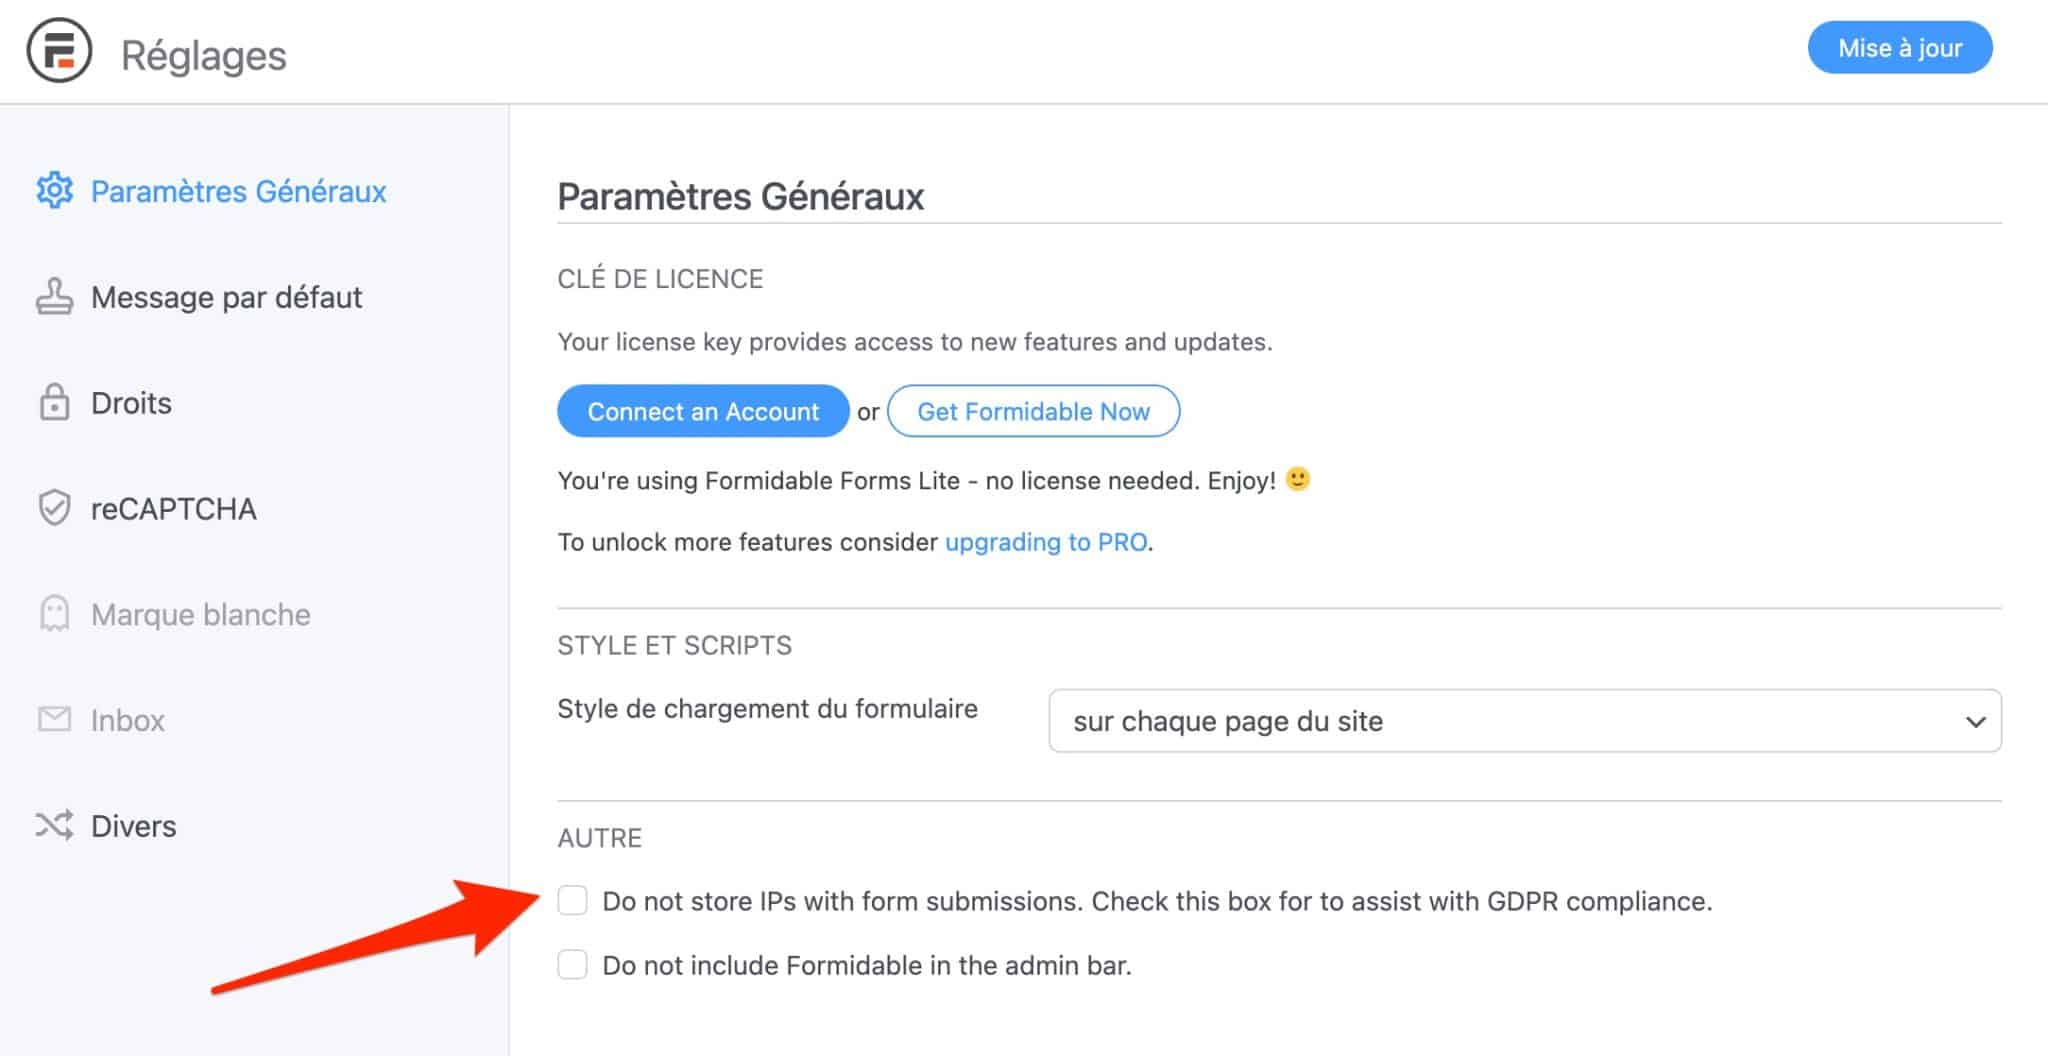 Formidable Forms offers options for GDPR compliance.